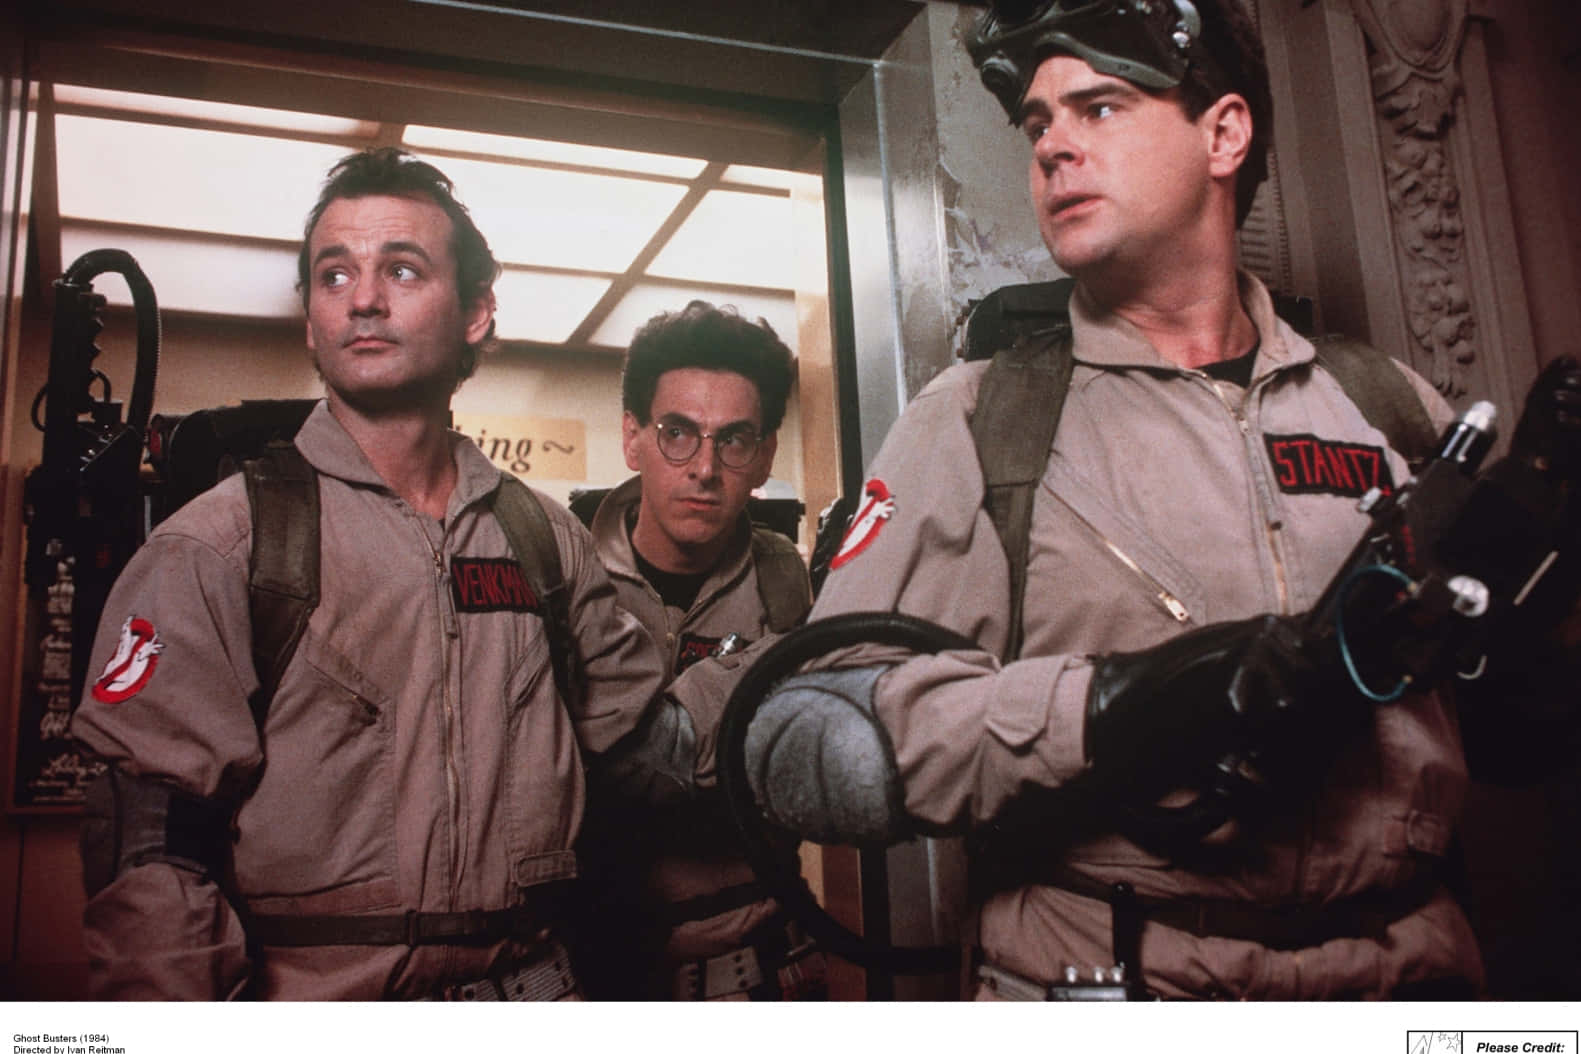 The legendary Ghostbusters team in action against a supernatural menace